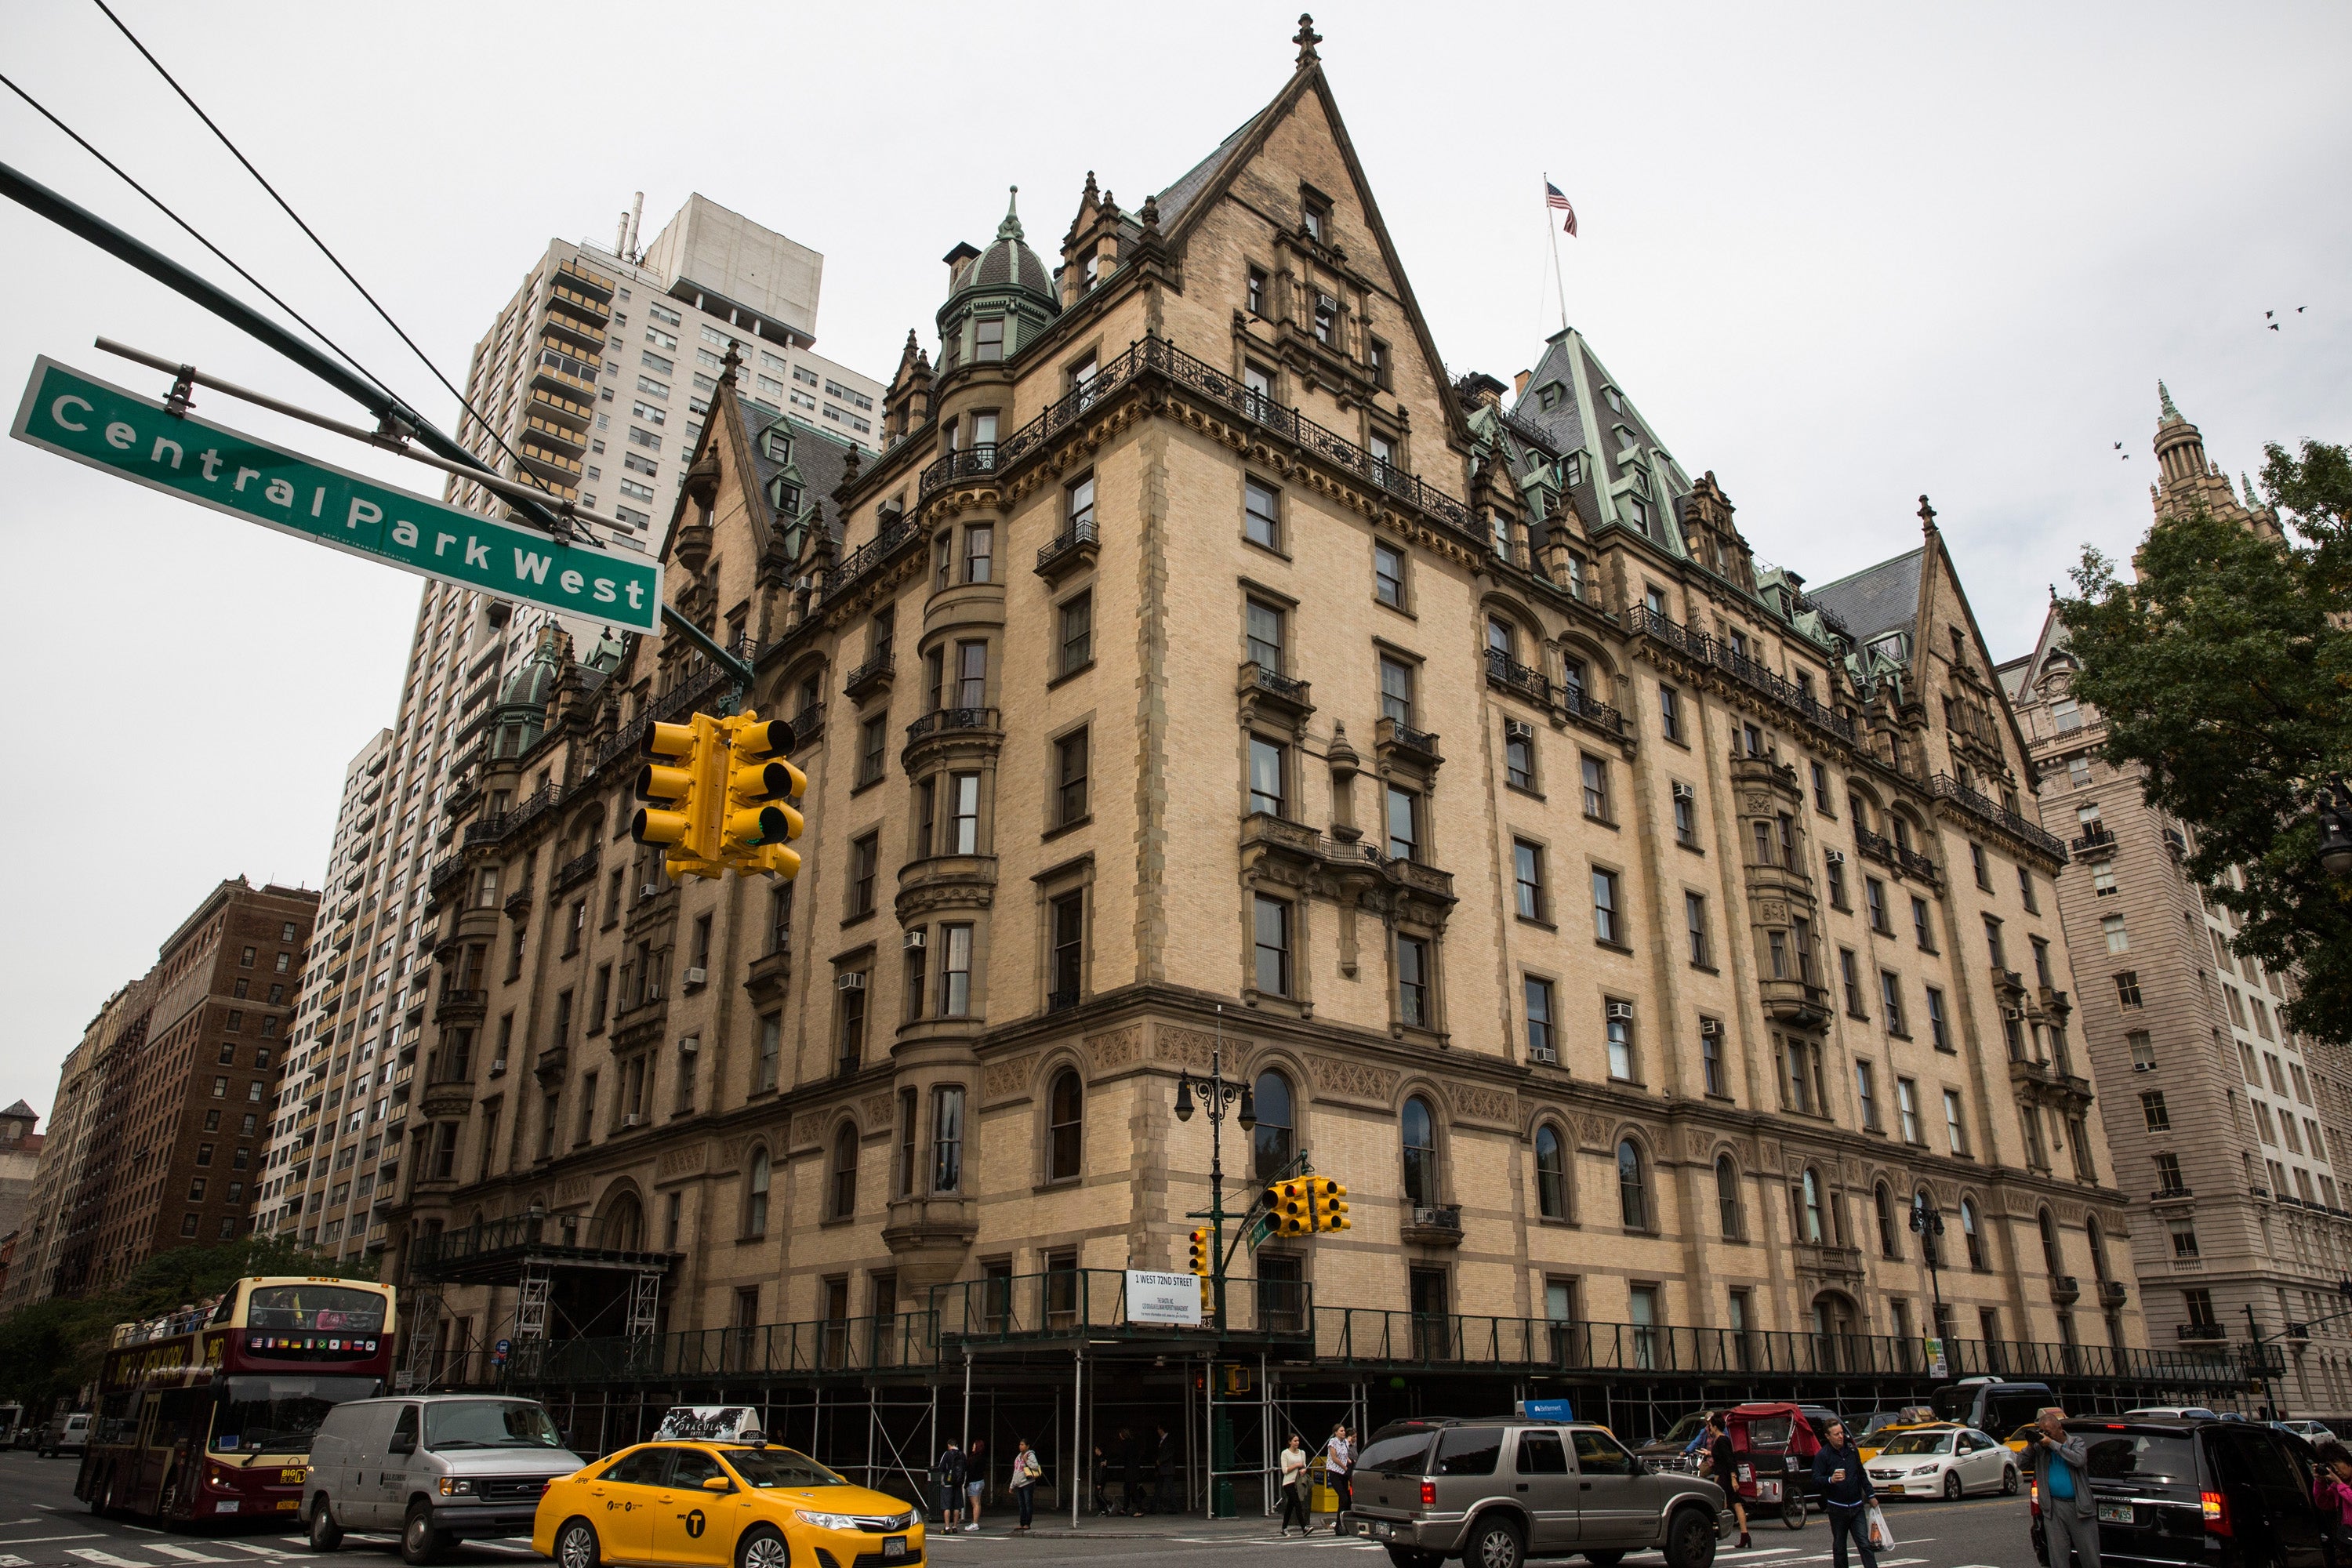 The Dakota, the New York City building John Lennon lived in and was murdered outside of, is seen on 9 October 2014